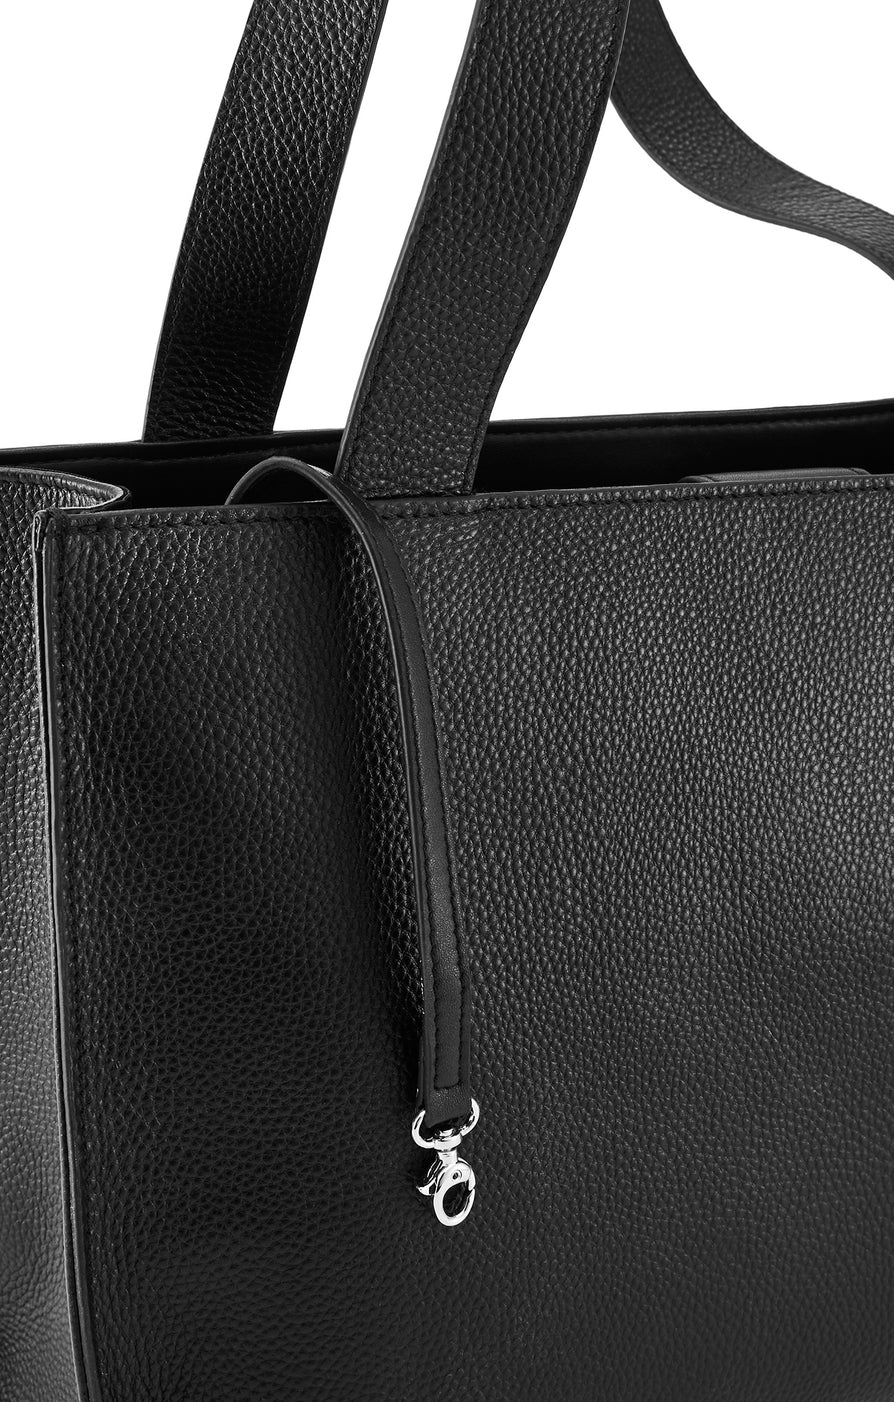 THE JEMIMA TOTE EMBOSSED